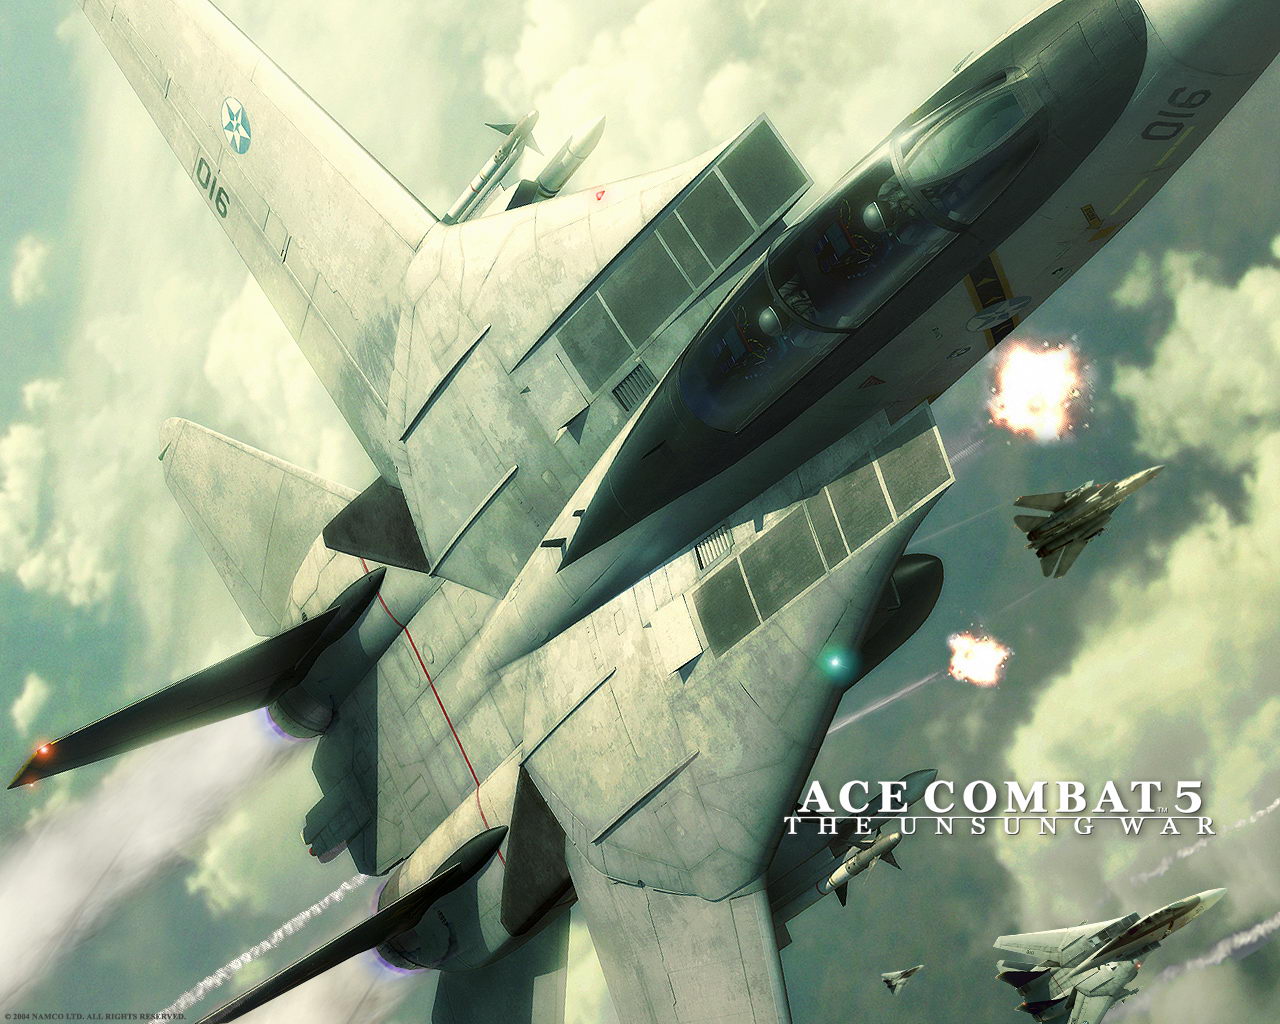 Ace Combat 5 The Unsung War Wallpapers Video Game Hq Ace Combat 5 The Unsung War Pictures 4k Wallpapers 19